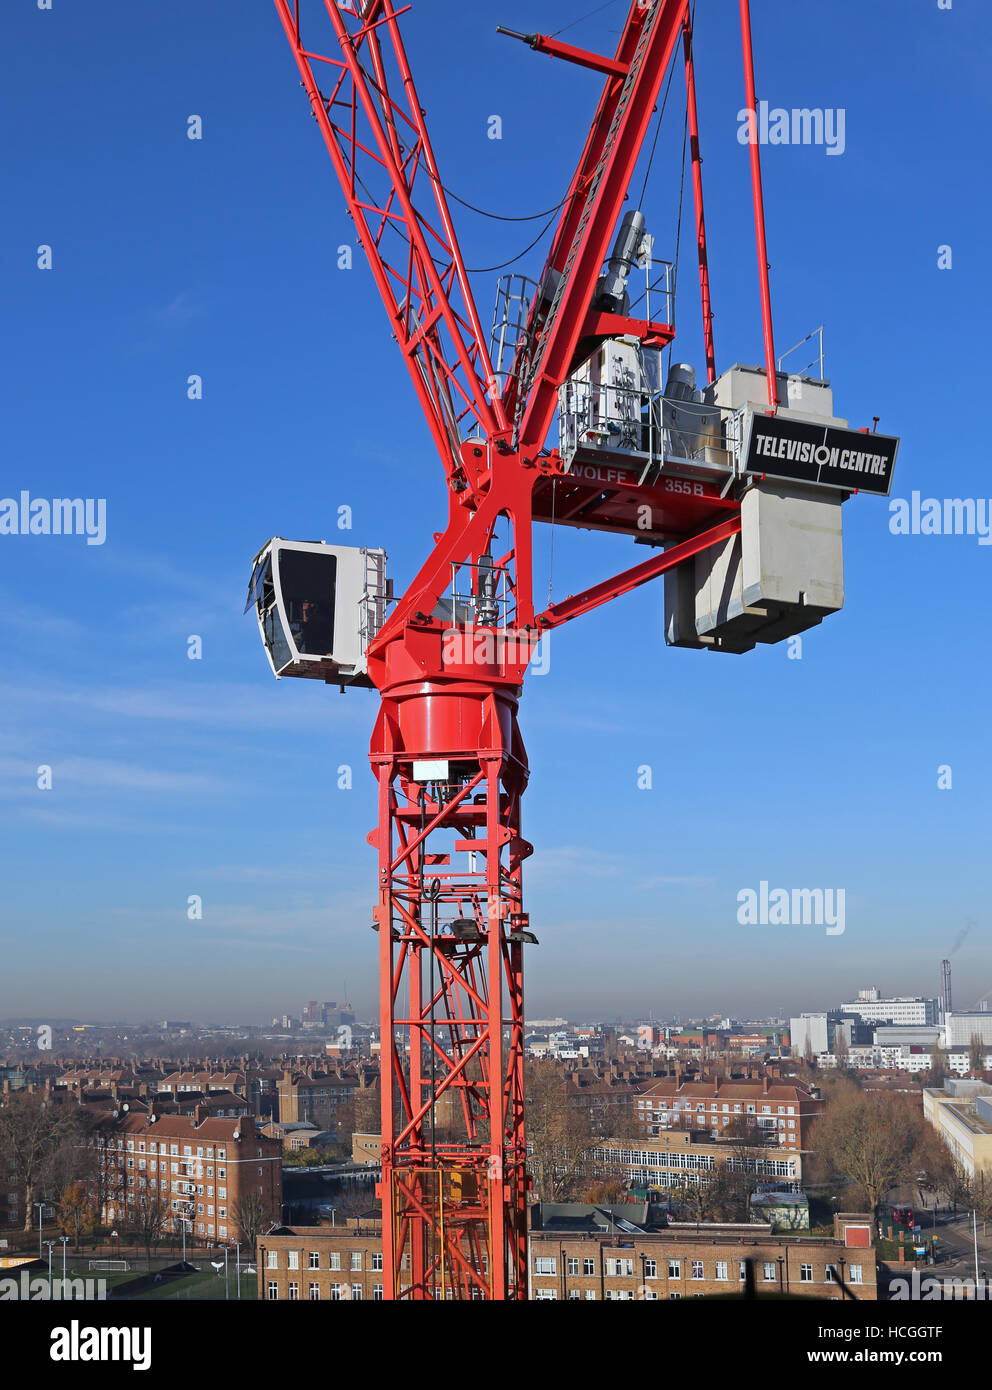 Red tower crane in operation on the redevelopment of  the BBC Television Centre site in West London. Crane sign shows the logo. Stock Photo